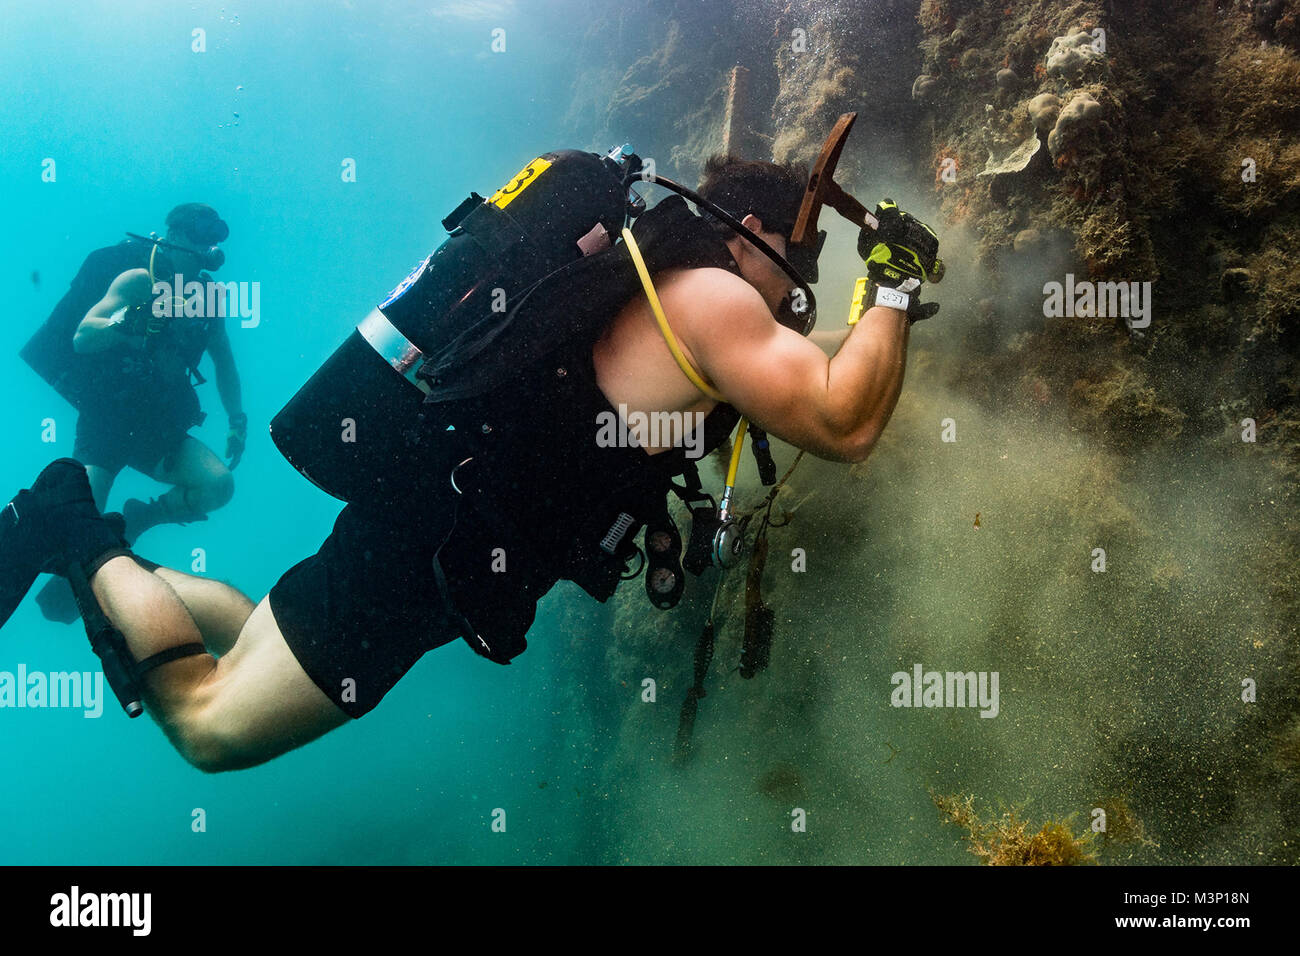 U.S. Navy Diver 2nd Class Logan Peters, assigned to Mobile Diving Salvage Unit (MDSU) 1, conducts an underwater pier survey with divers from Underwater Construction Team (UCT) 2 in Apra Harbor, Guam, Dec 14, 2017.  UCT-2 provides construction, inspection, maintenance, and repair of underwater and waterfront facilities in support of the Pacific Fleet. (U.S. Navy Combat Camera photo by Mass Communication Specialist 1st Class Arthurgwain L. Marquez) U.S. Navy divers conduct underwater pier survey in Apra Harbor, Guam by #PACOM Stock Photo